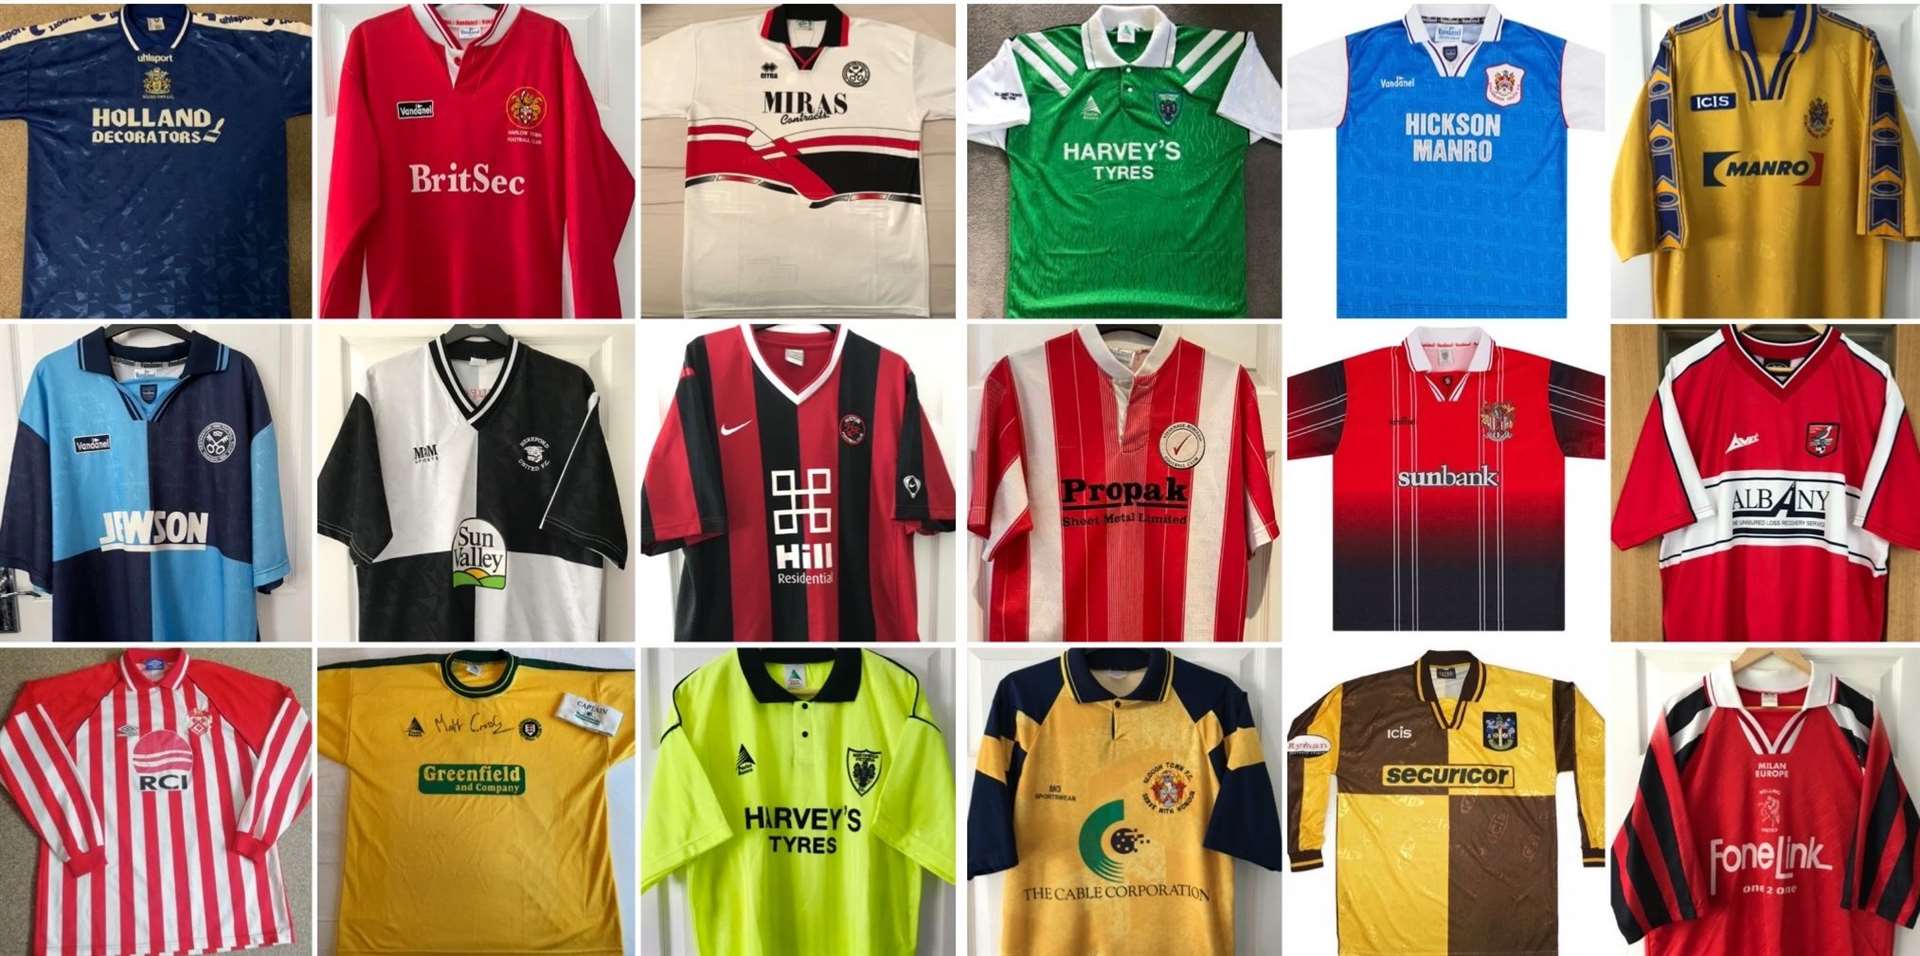 Just a selection of shirts from the collection of fan Lee Bowman